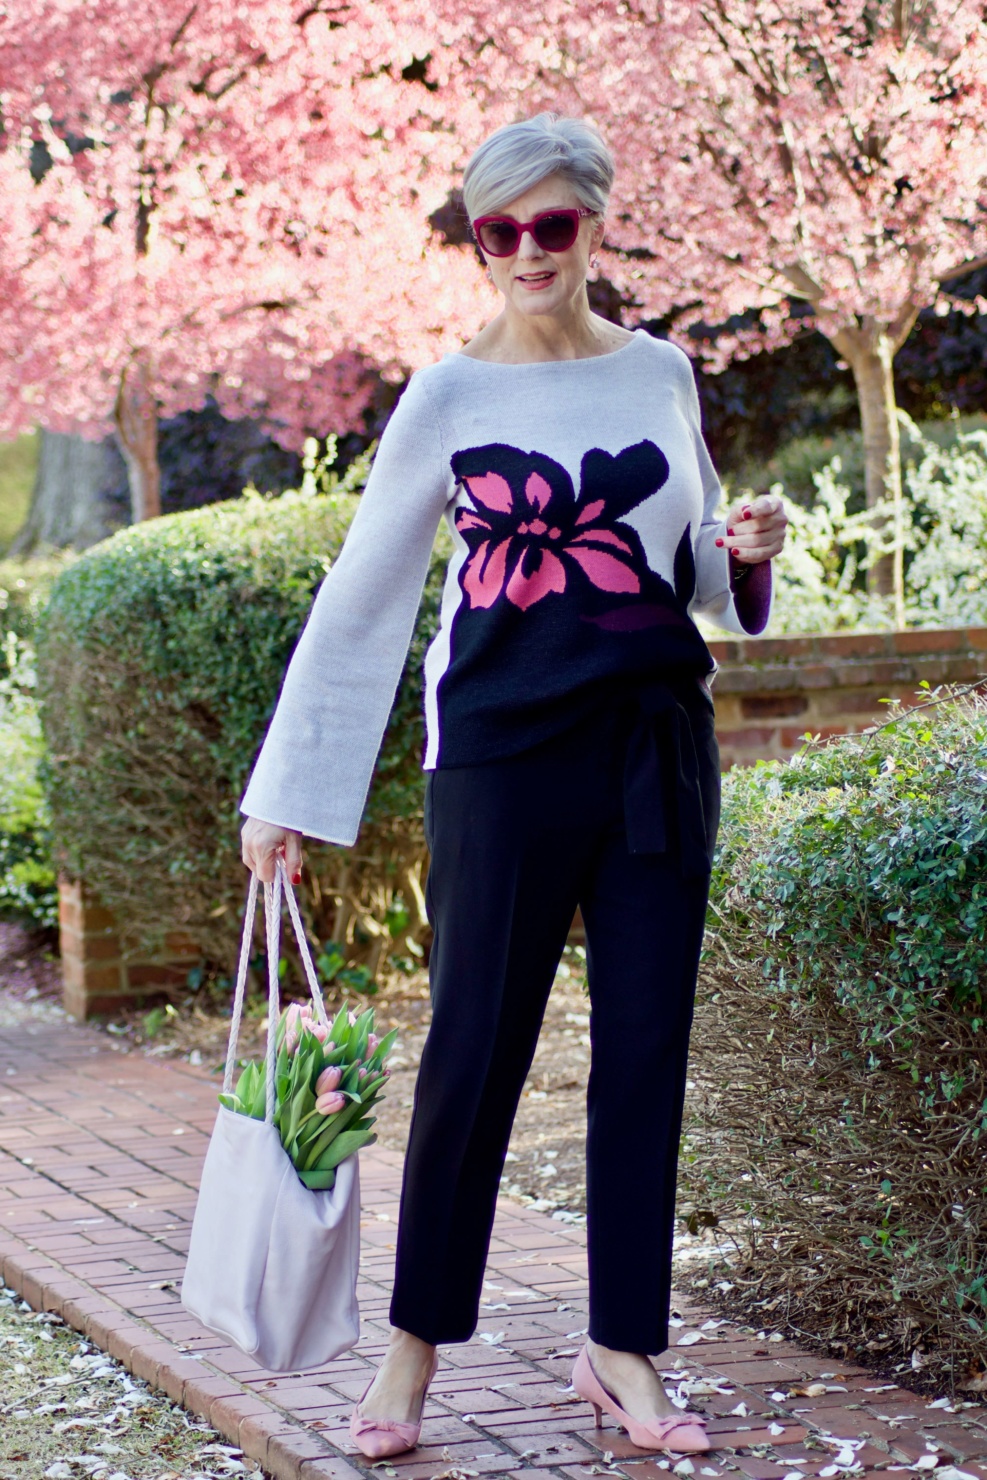 beth from Style at a Certain Age wears an Ann Taylor floral sweater, black ankle tie pants, and pink kitten heels